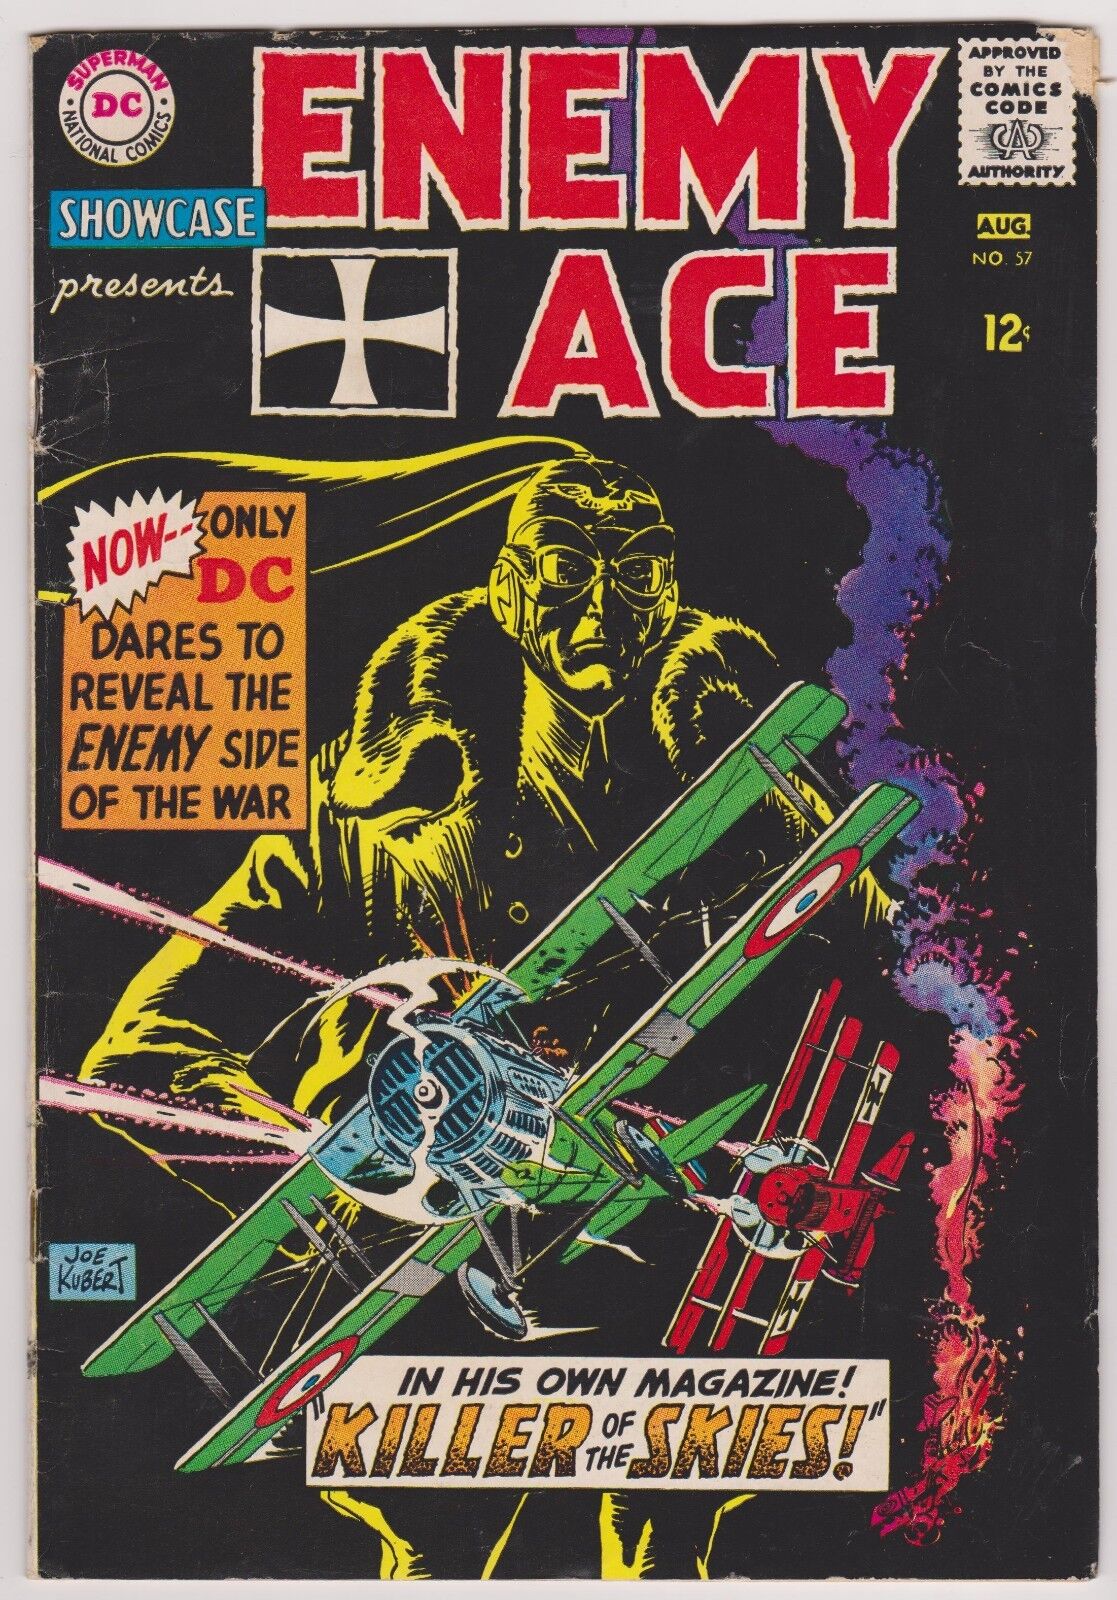 Showcase #57 Featuring Enemy Ace, Very Good Plus Condition